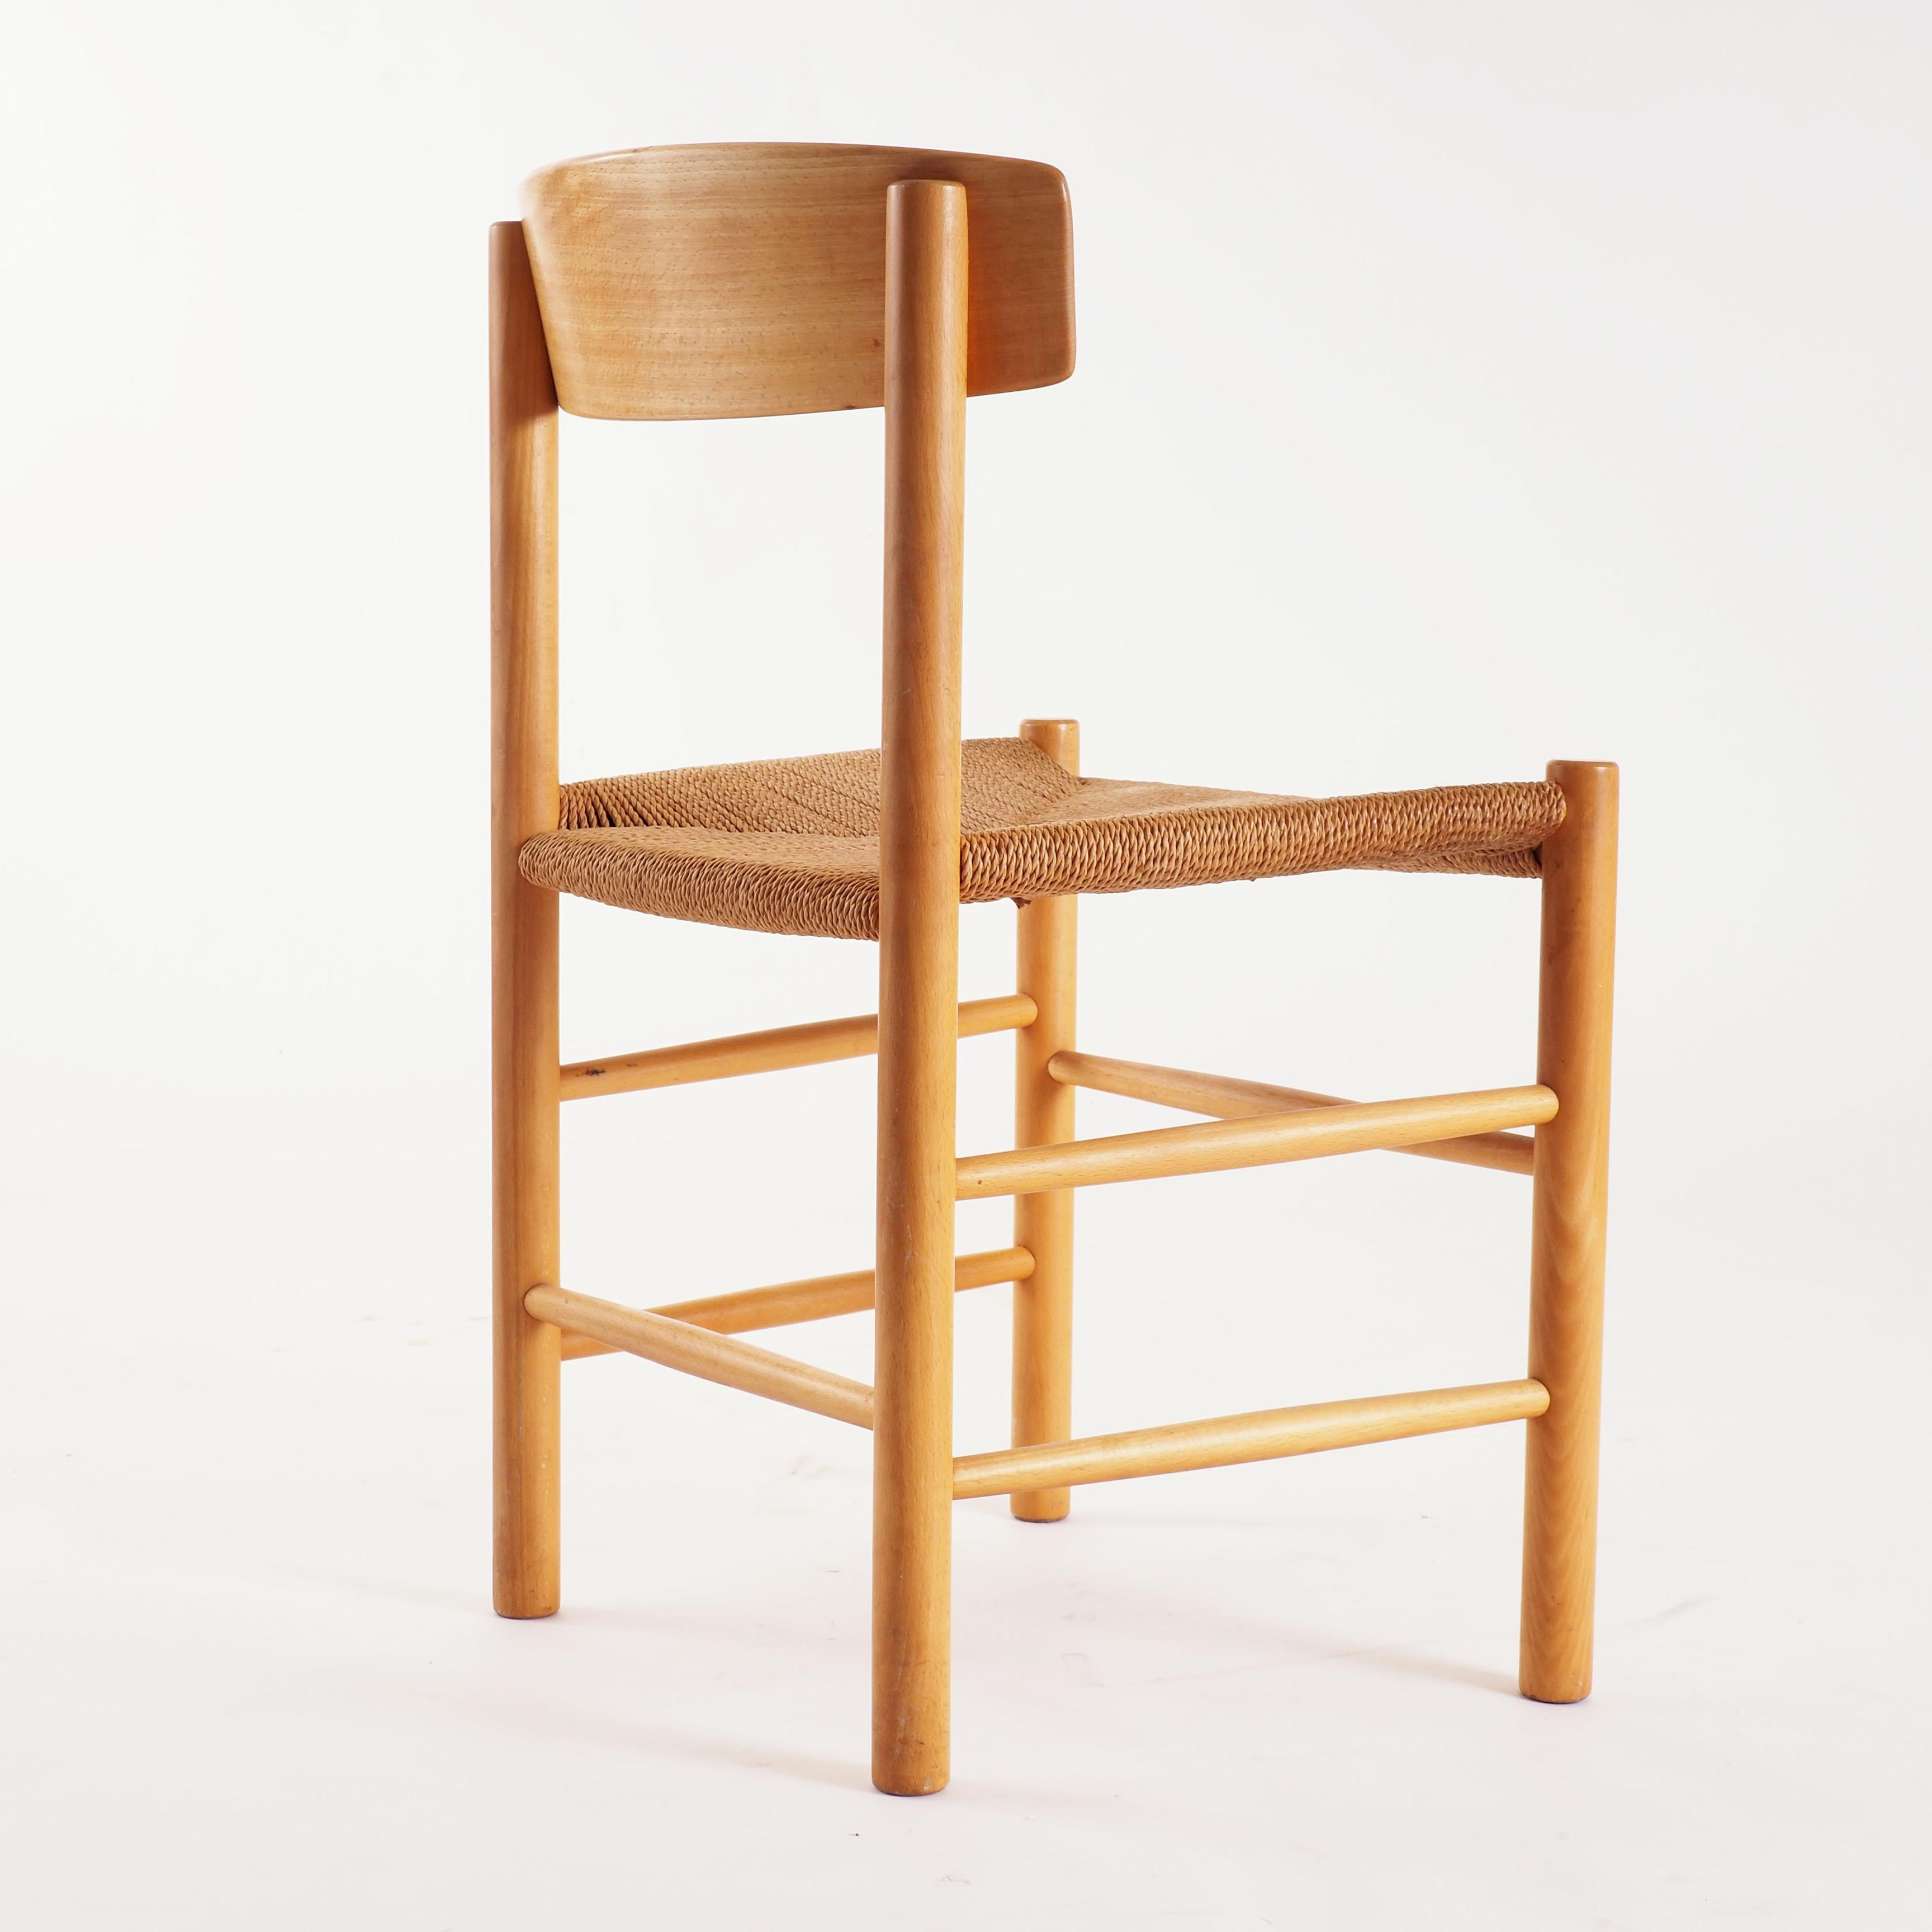 Hand-Woven J39 chairs in beech and papercord by Børge Mogensen